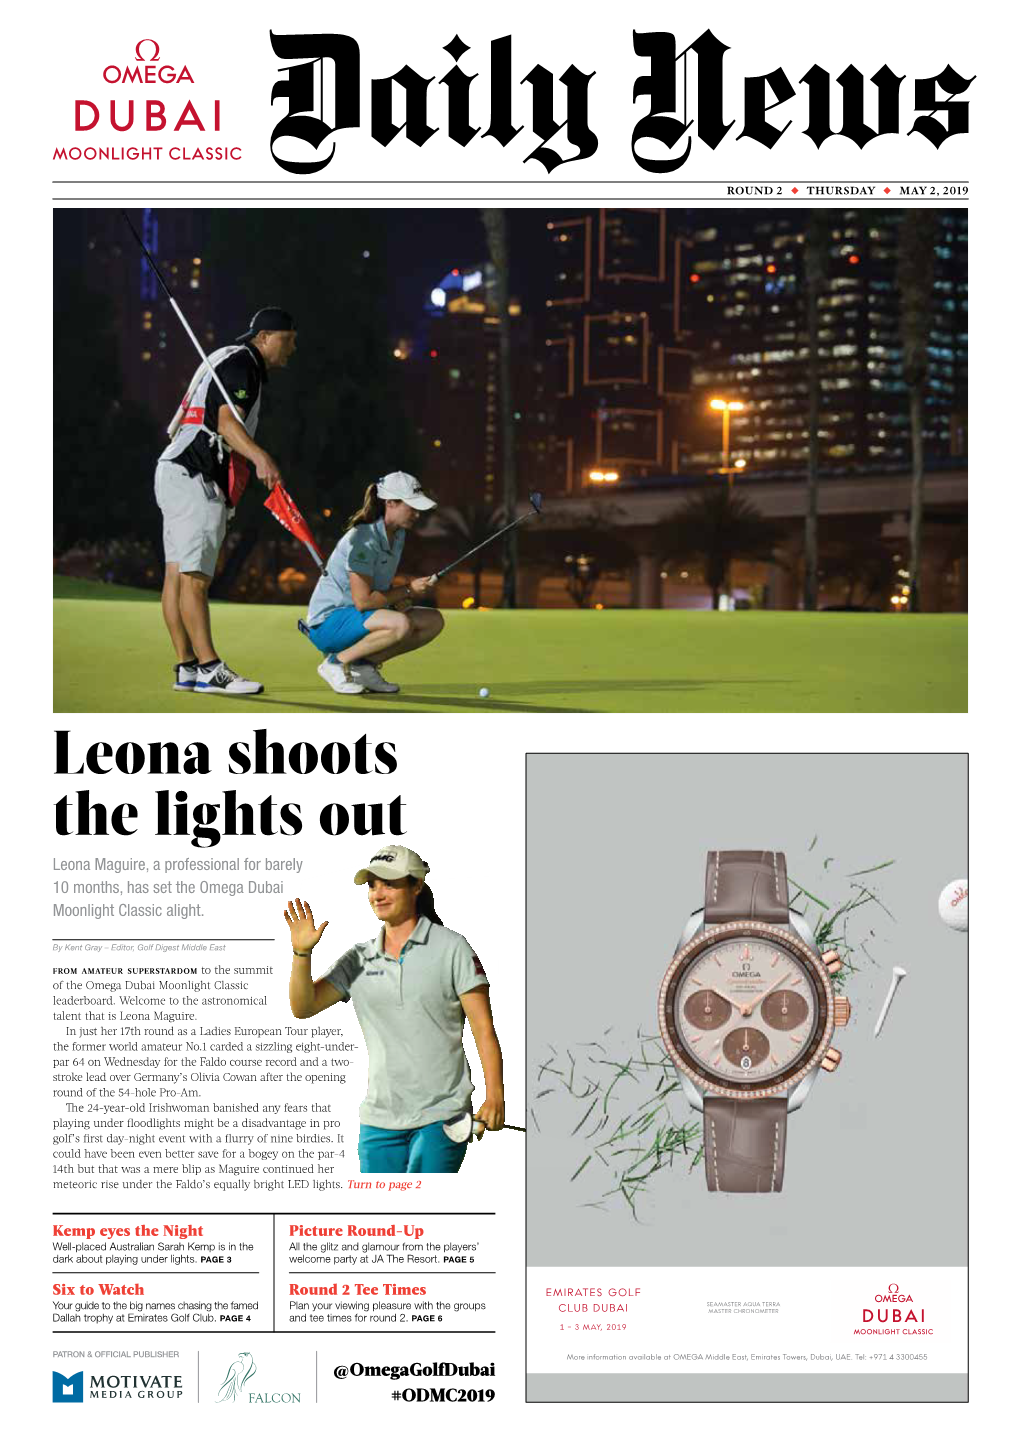 Leona Shoots the Lights out Leona Maguire, a Professional for Barely 10 Months, Has Set the Omega Dubai Moonlight Classic Alight